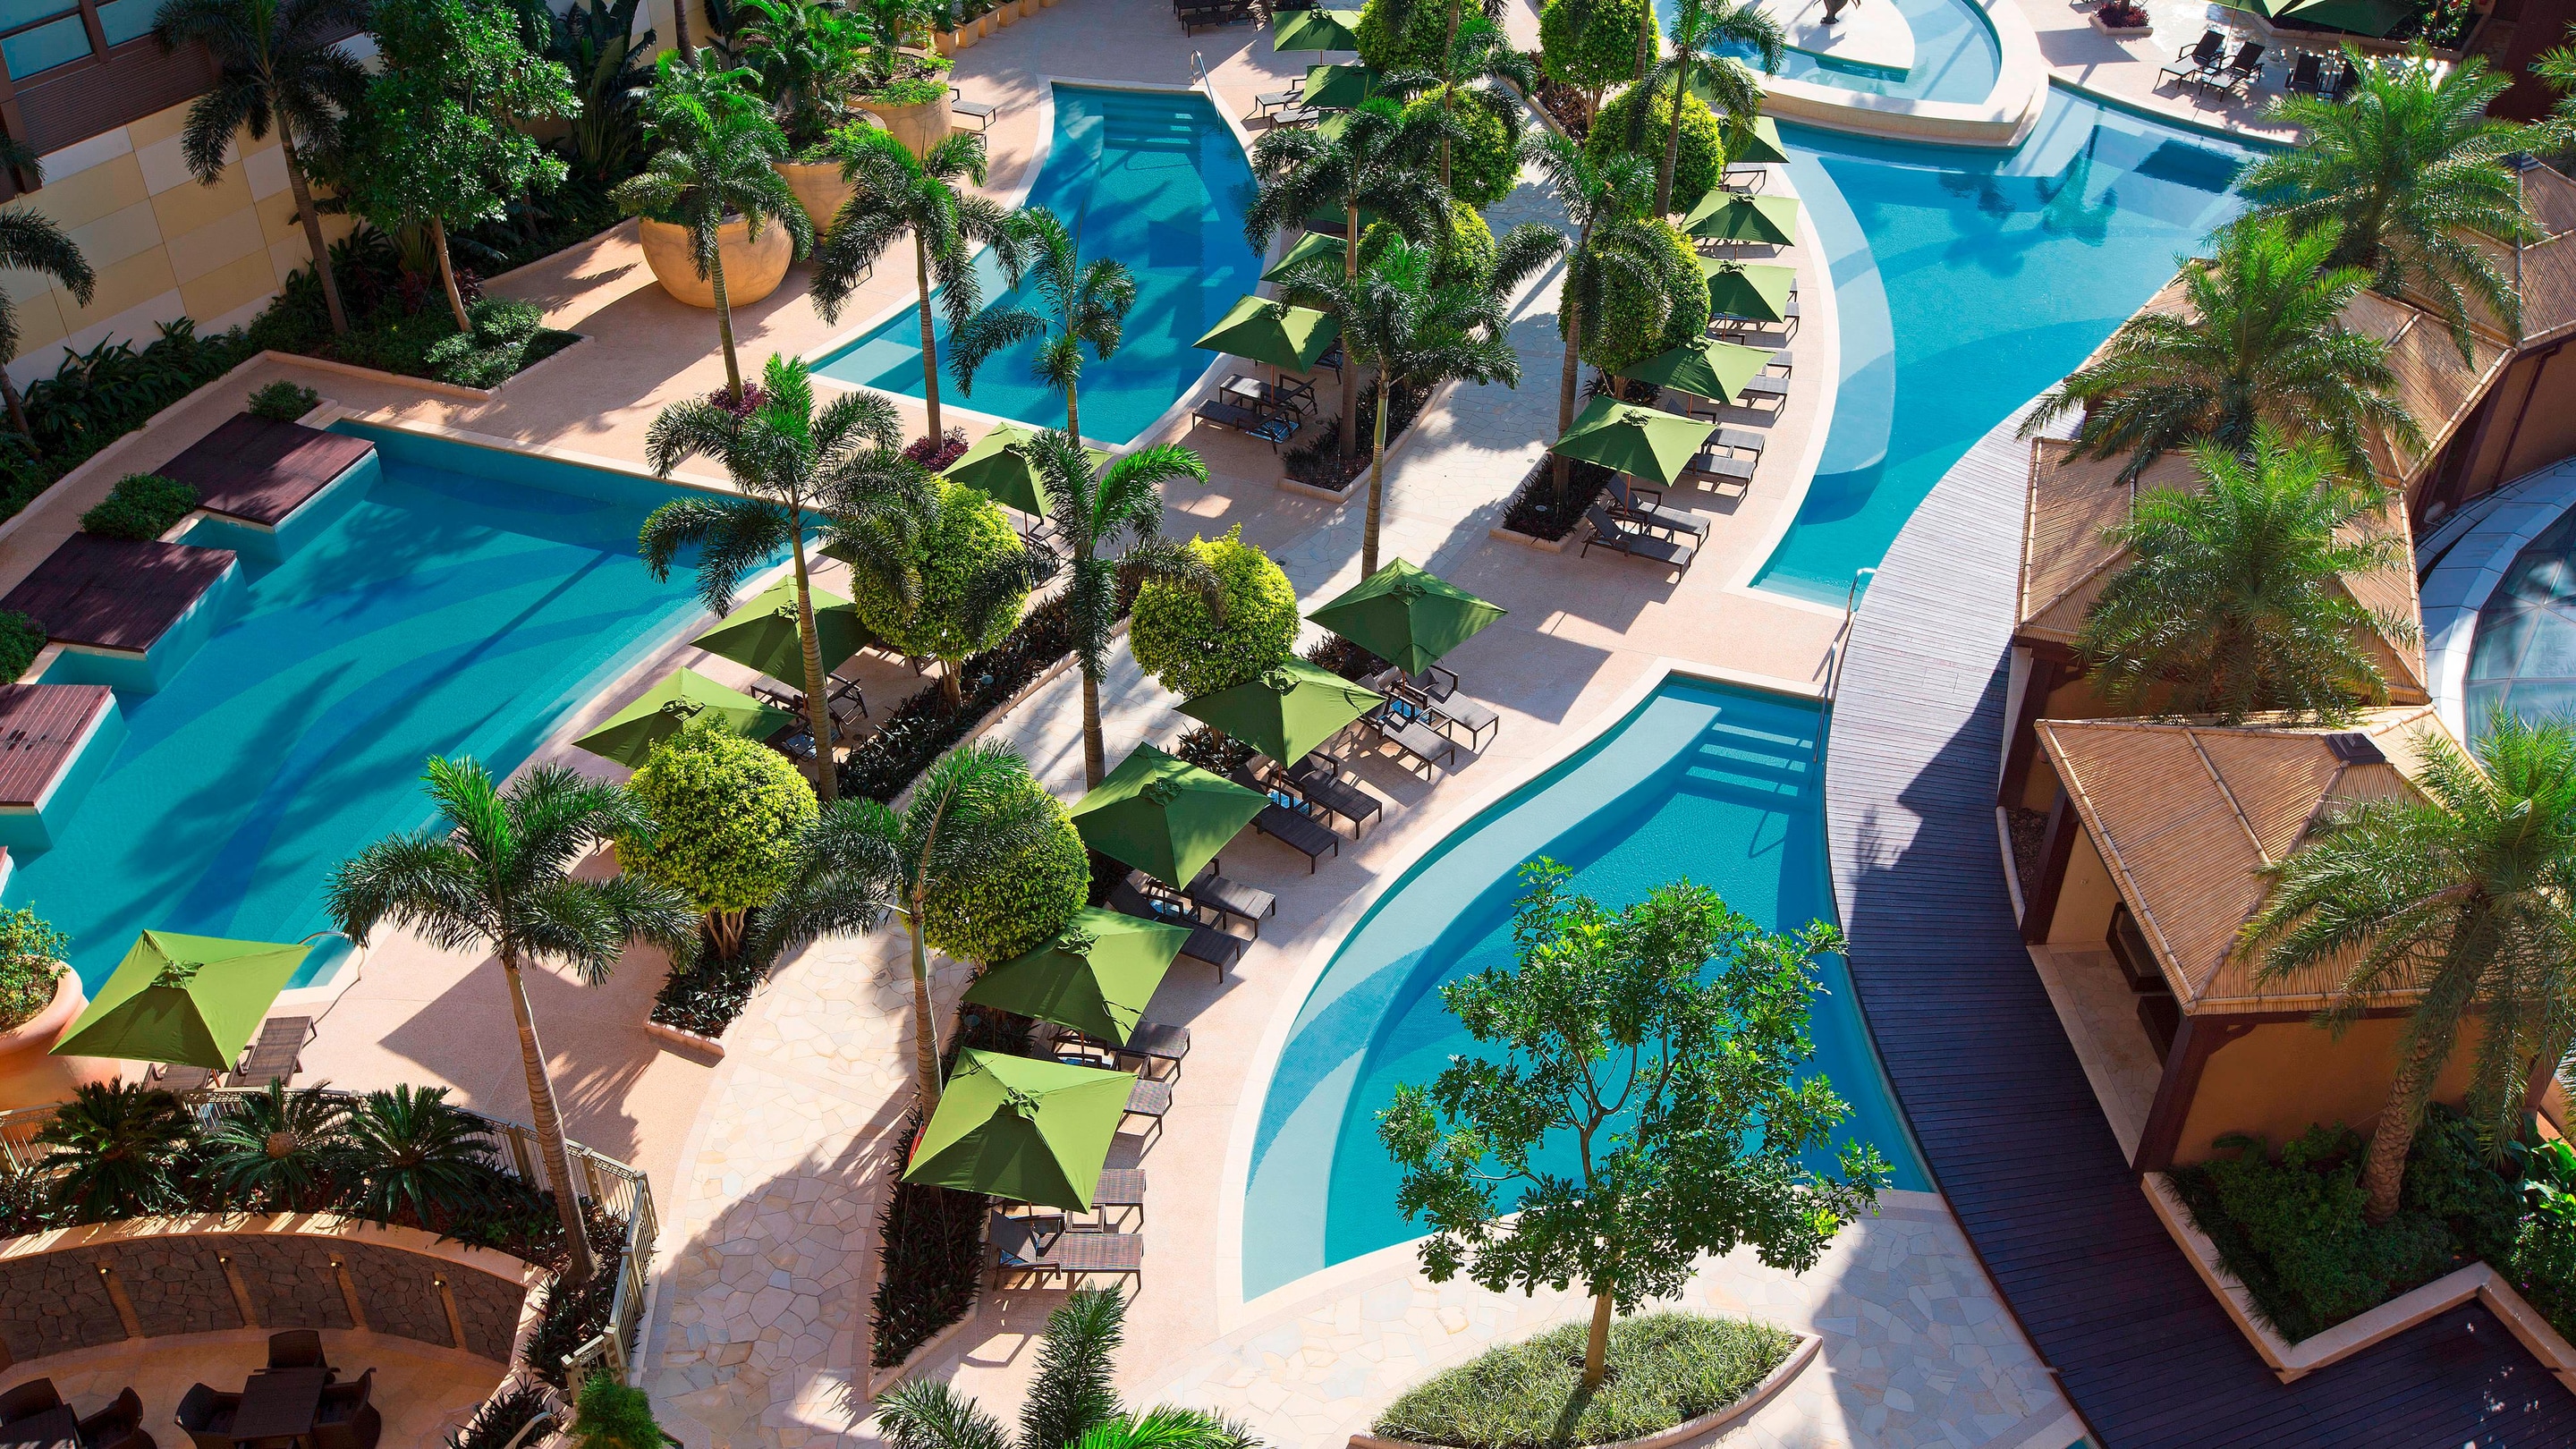 Aerial view of swimming pools, cabanas and foliage